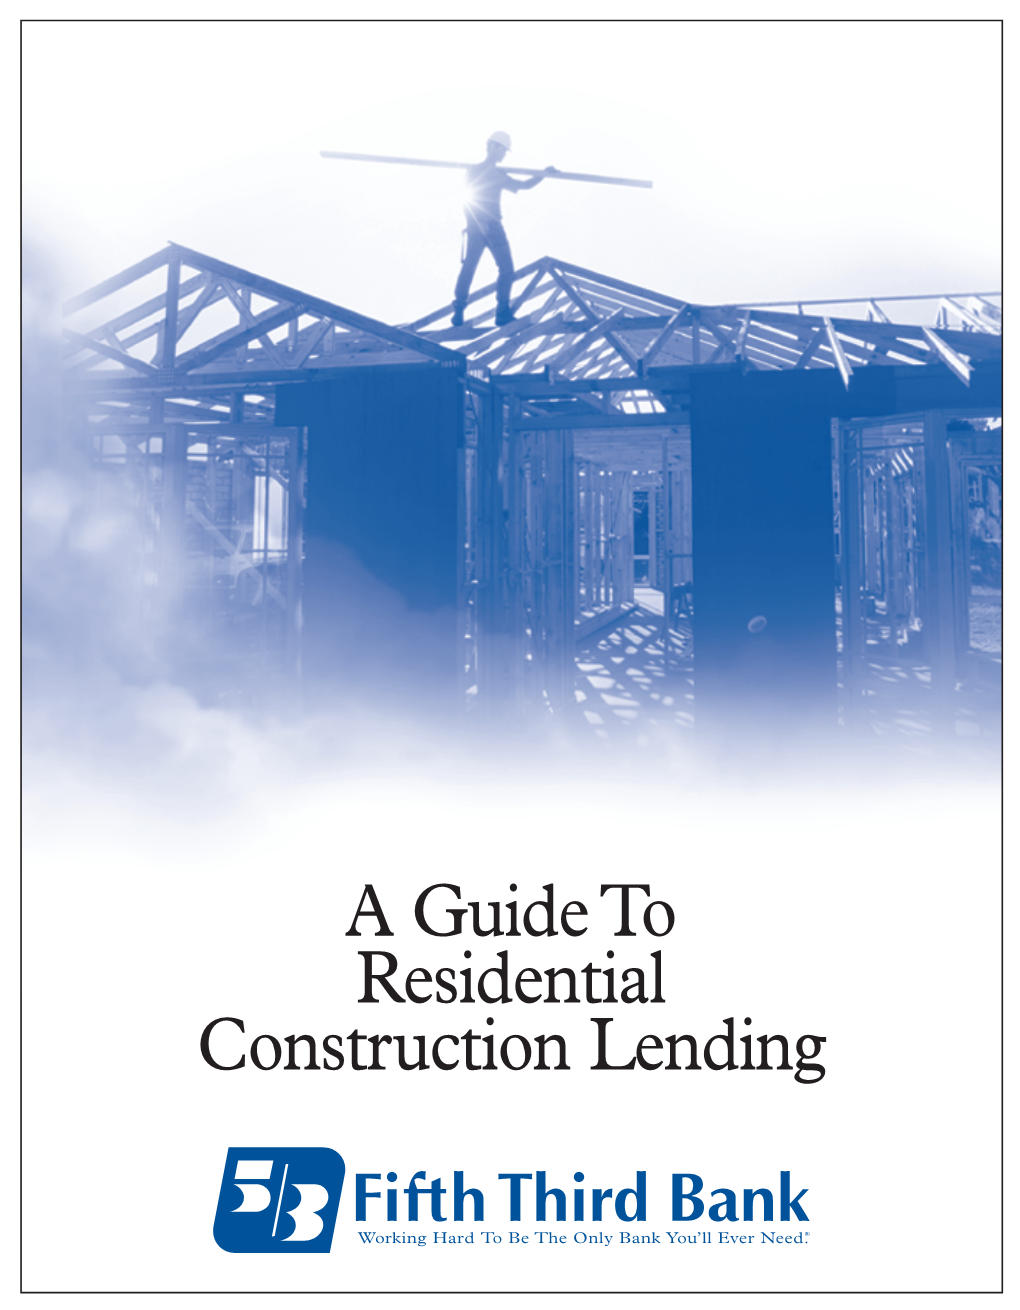 Fifth Third Bank Guide to Residential Construction Lending